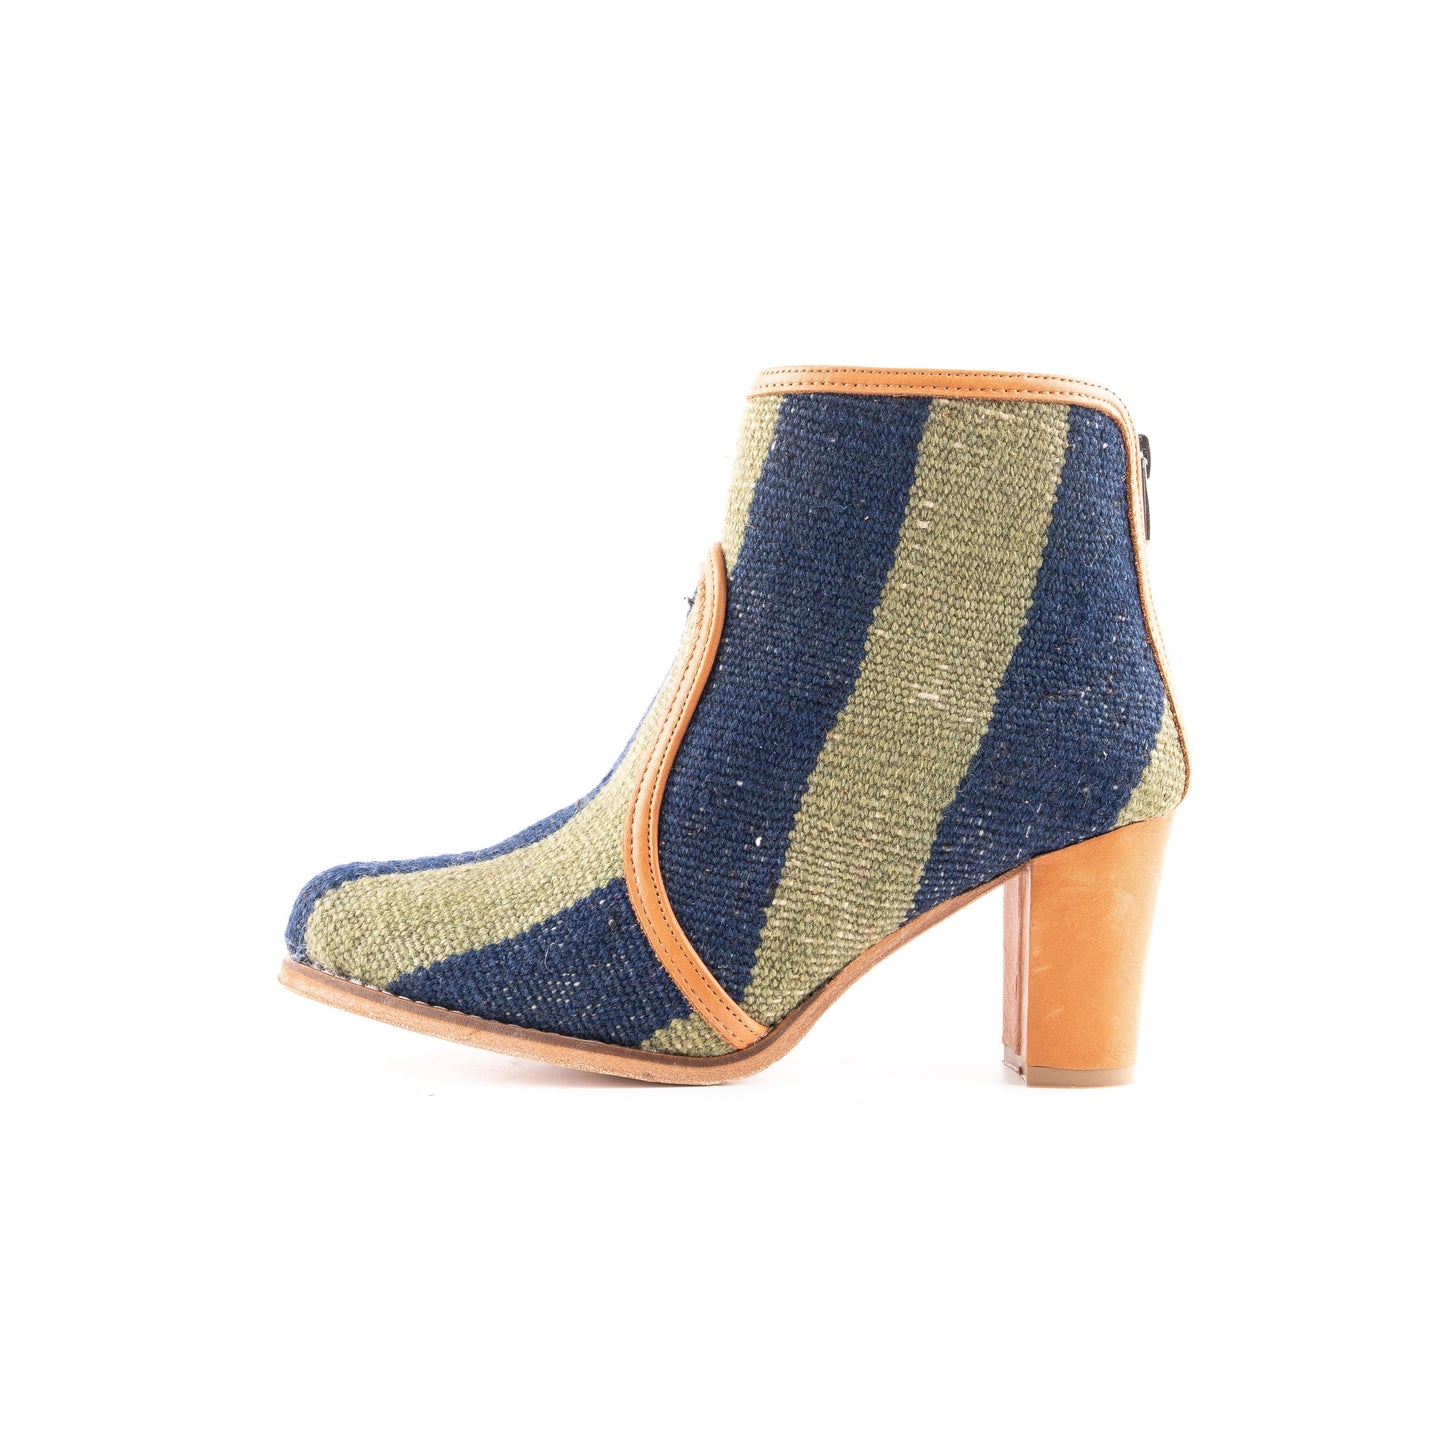 Ethnic Woman Heel Ankle Boot Crafted From Handmade Kilim and Real Leather Size 7.5 - Base Width: 8 cm - Base Length: 22 cm - Heel: 7 cm